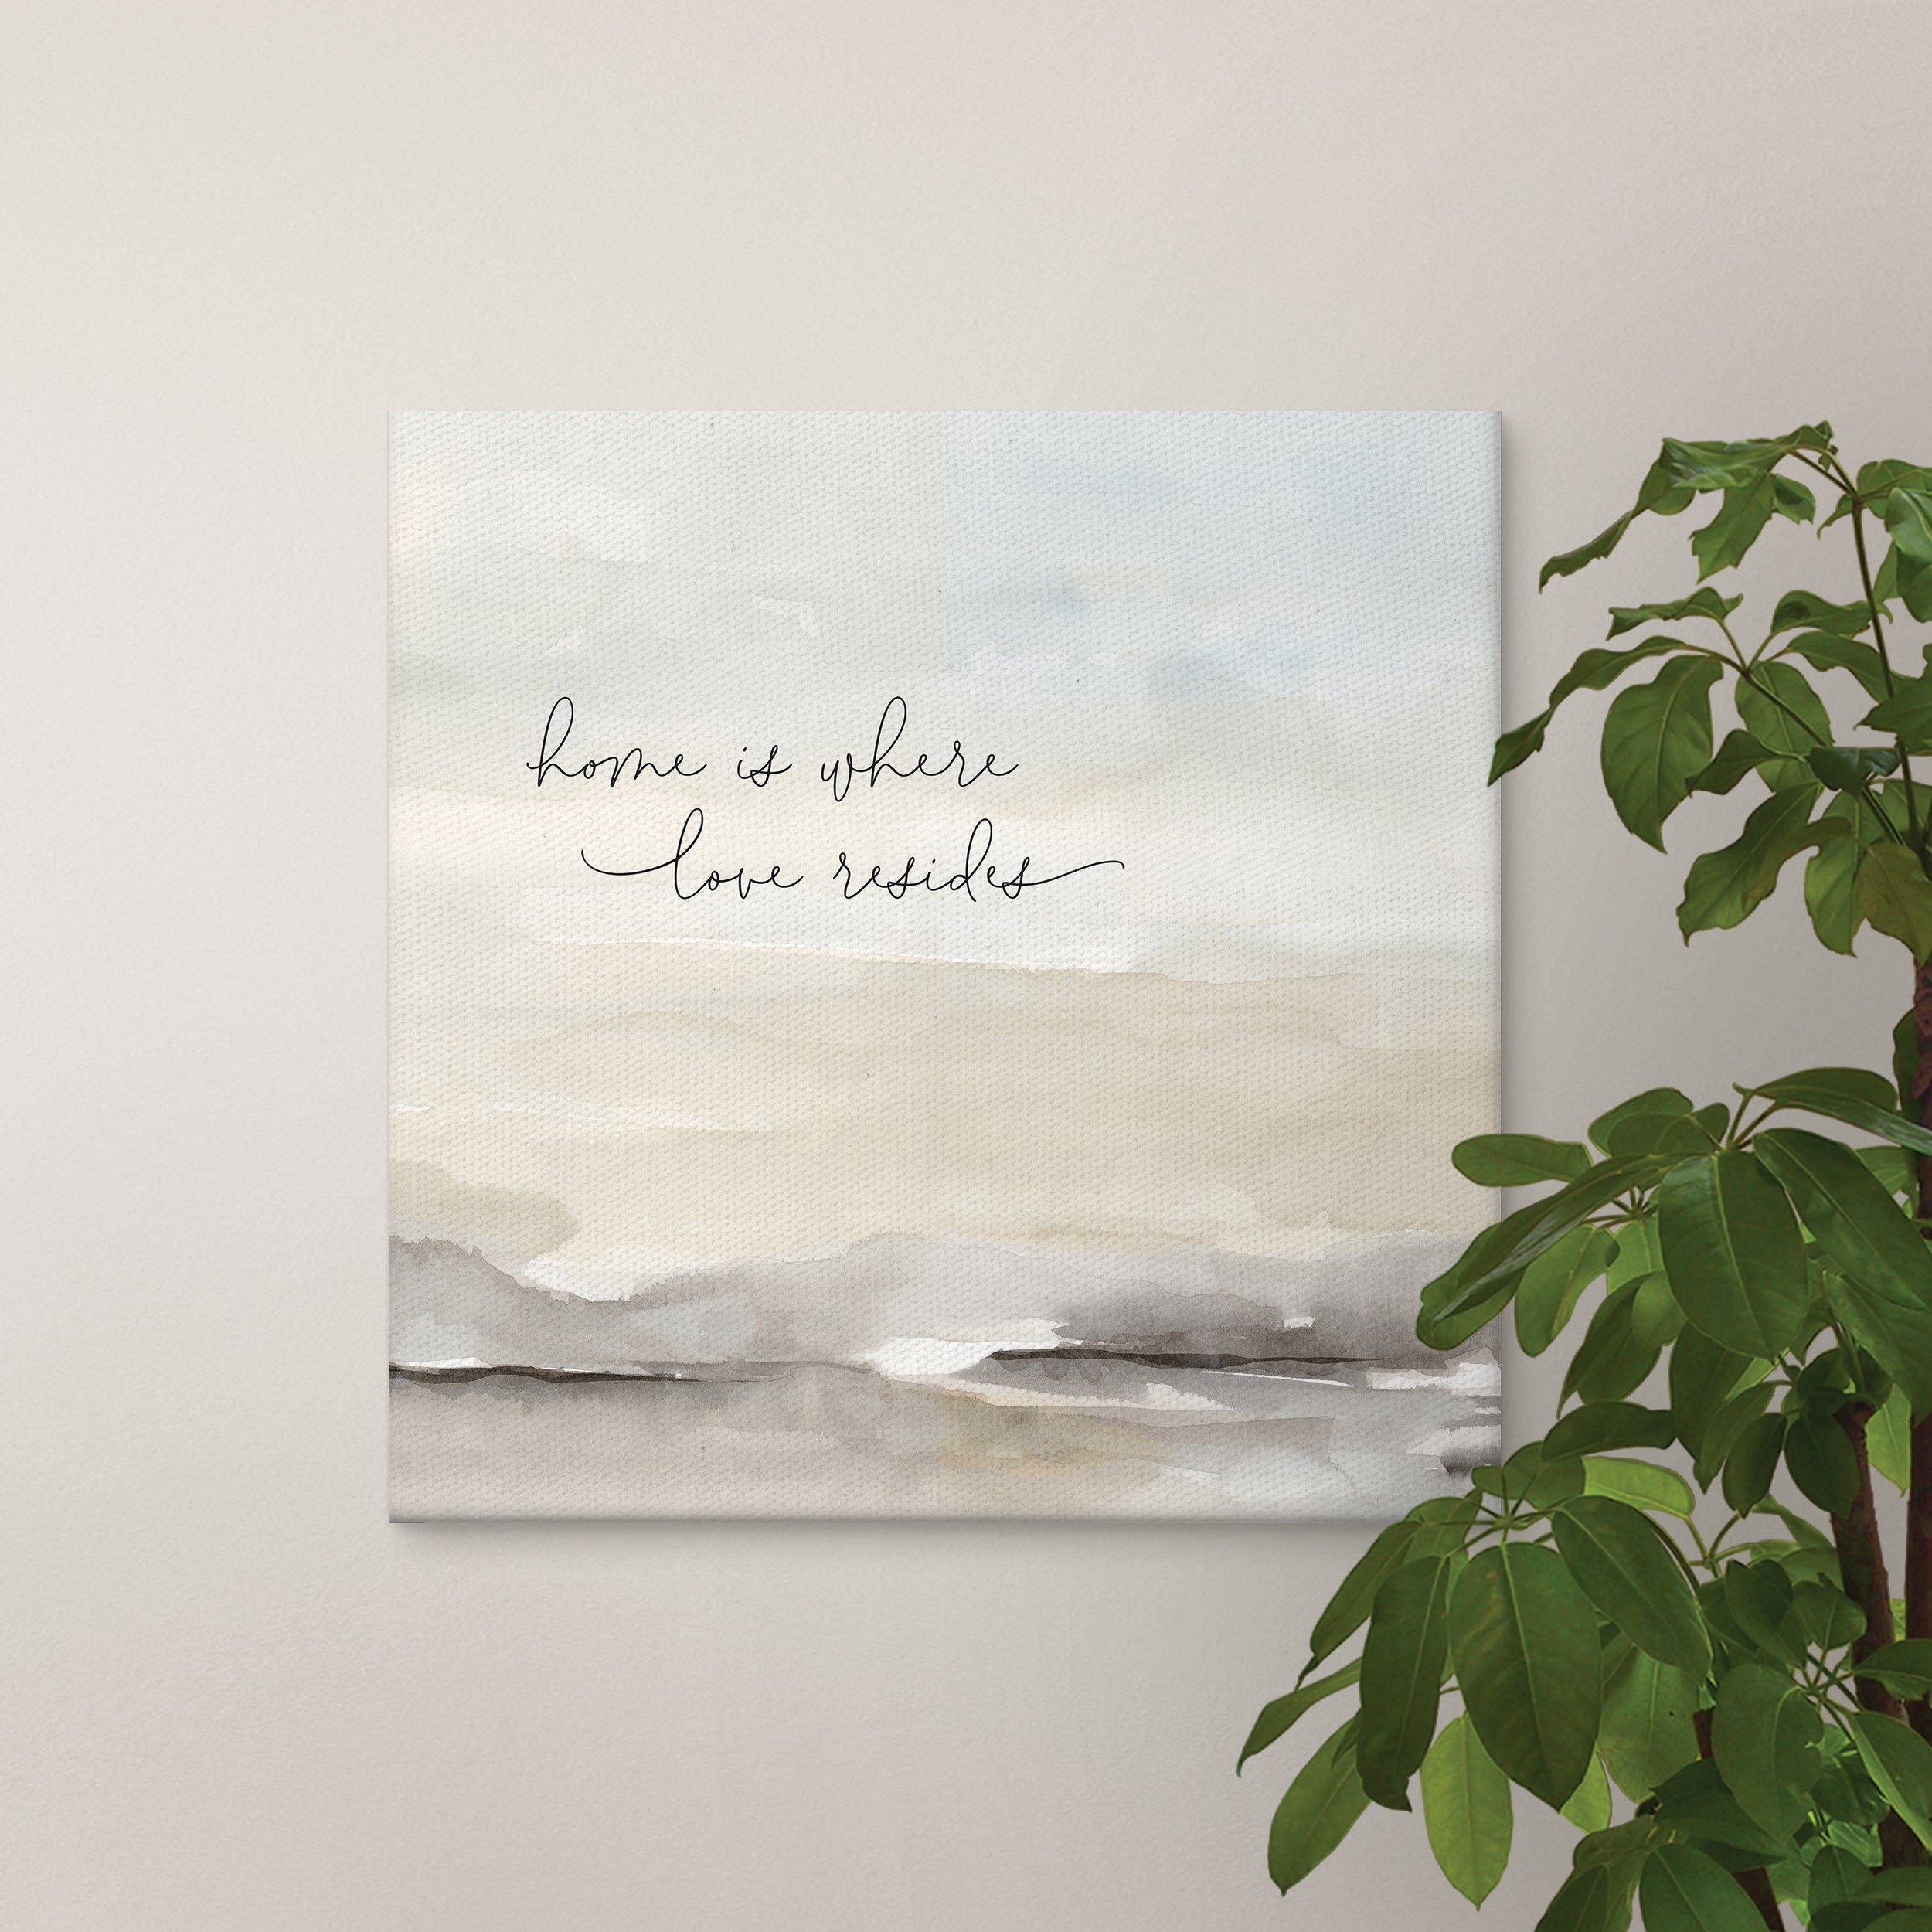 Home Is Where Love Resides Canvas